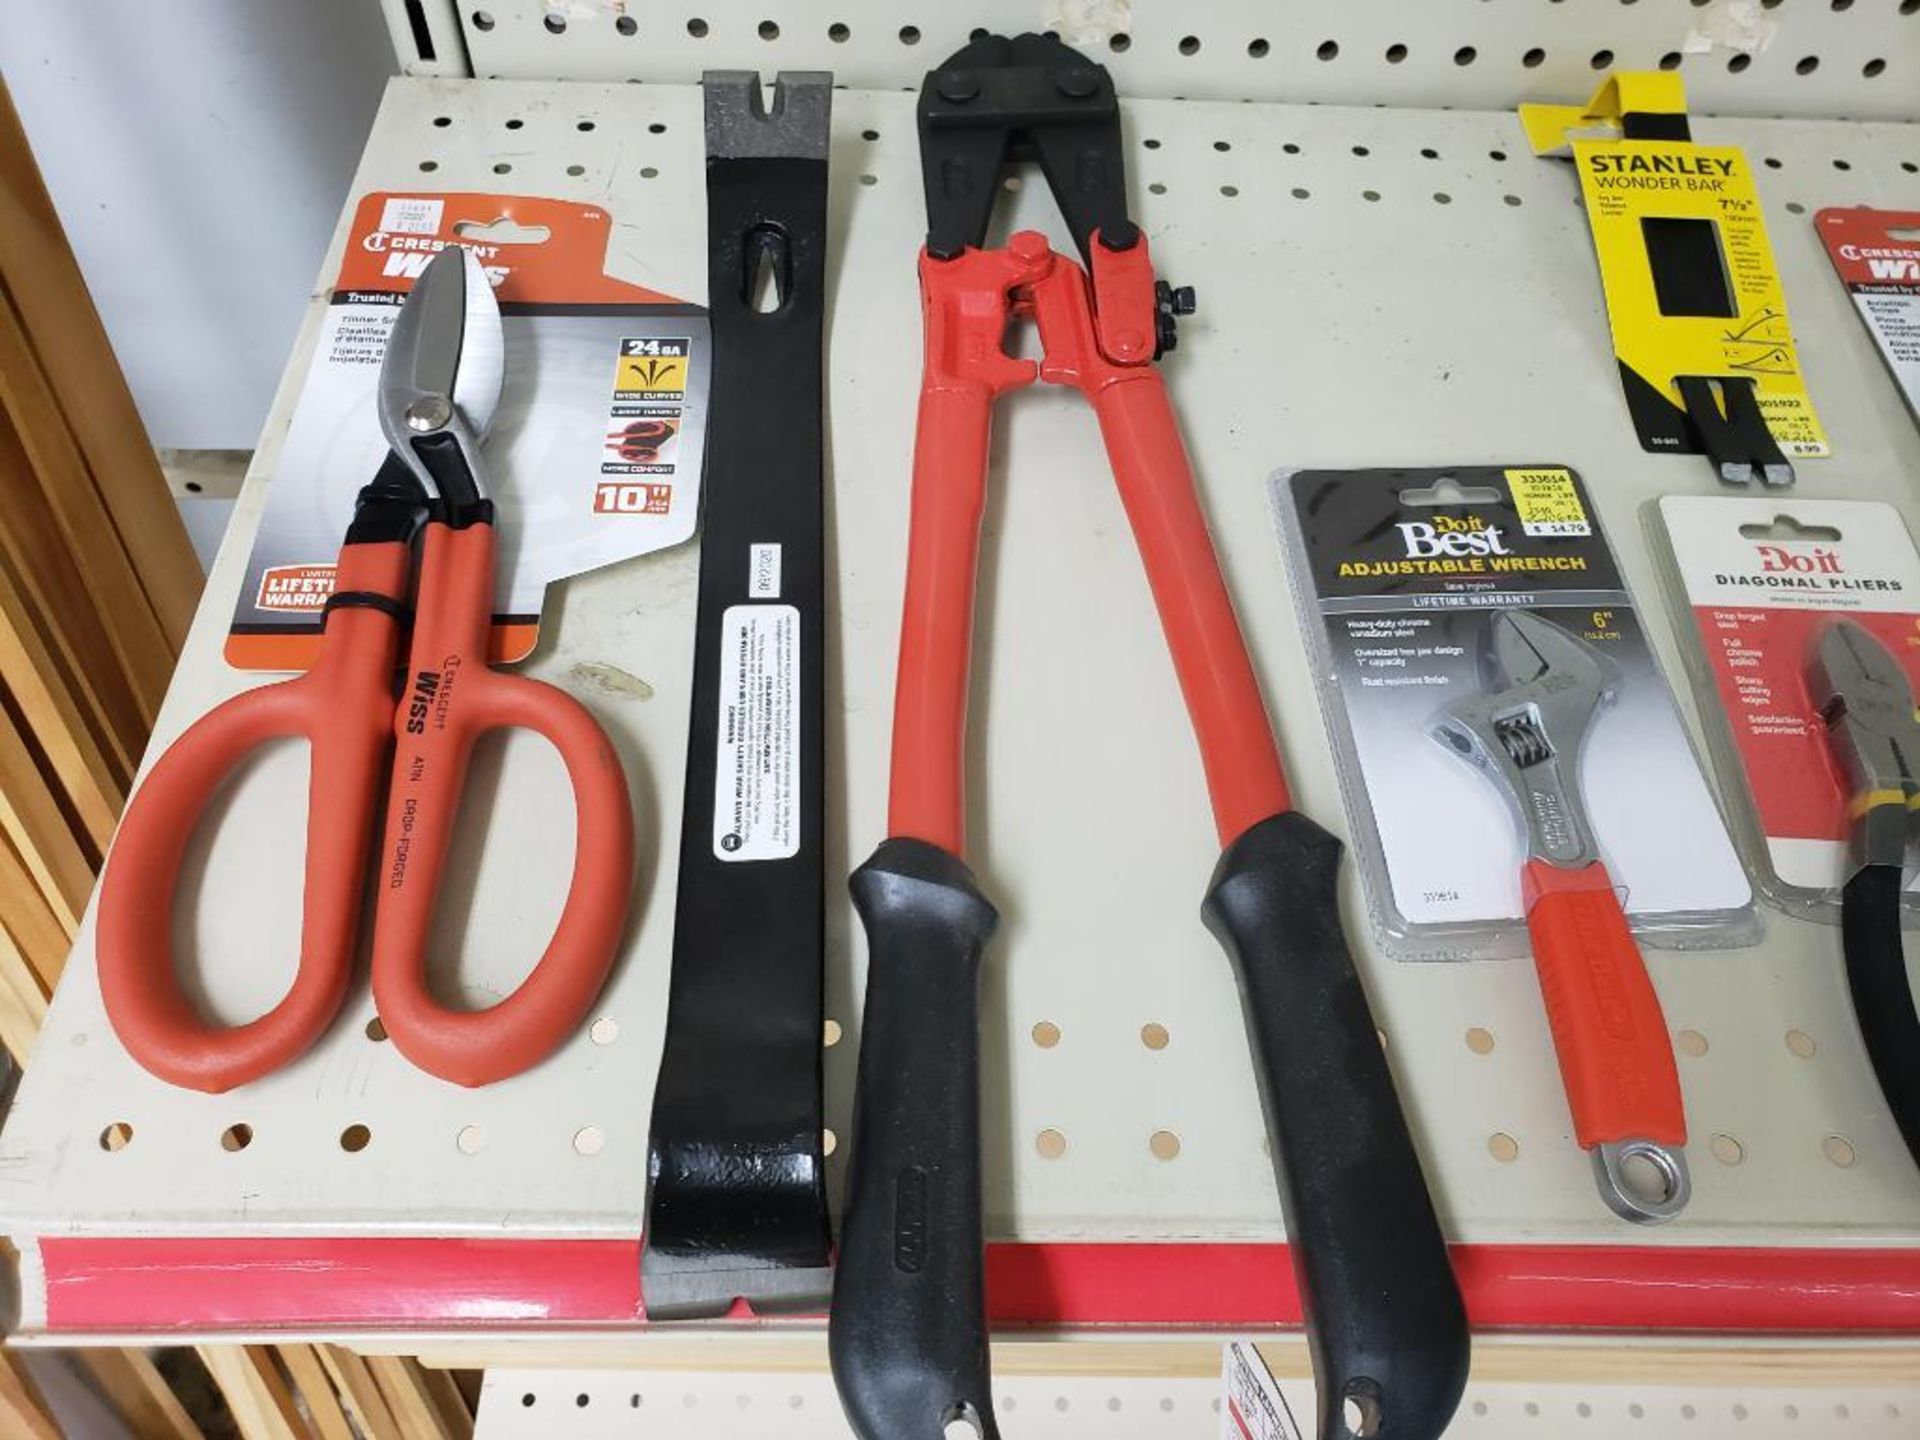 Large assortment of tools. Hammers, prybars, snips, plyers, and more! New as pictured. - Image 3 of 11